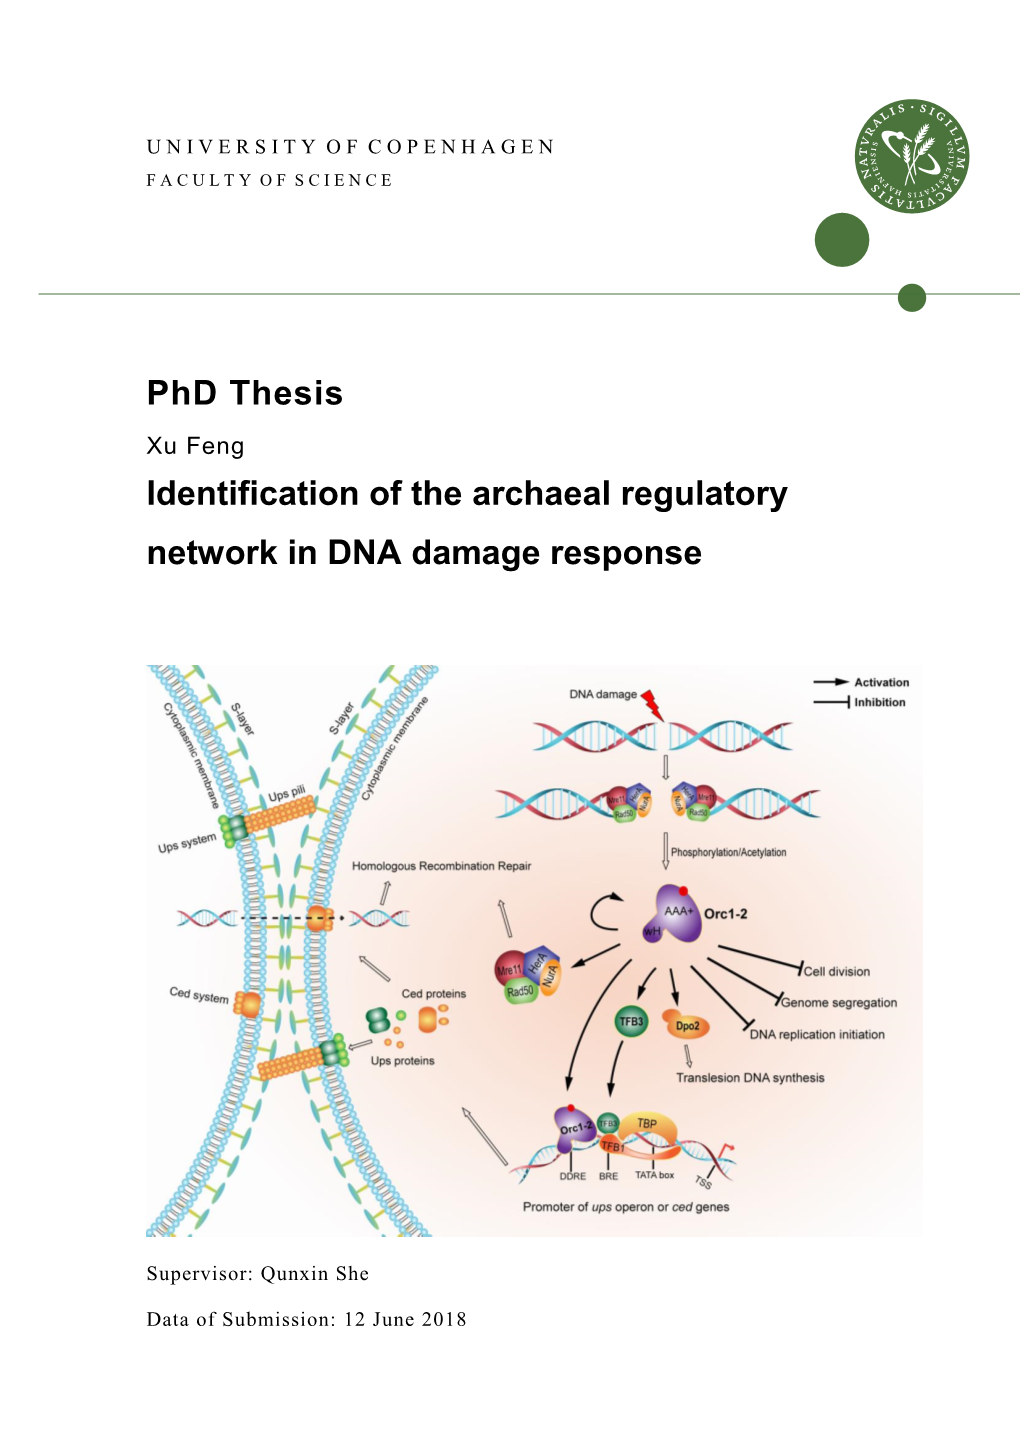 Phd Thesis Identification of the Archaeal Regulatory Network in DNA Damage Response